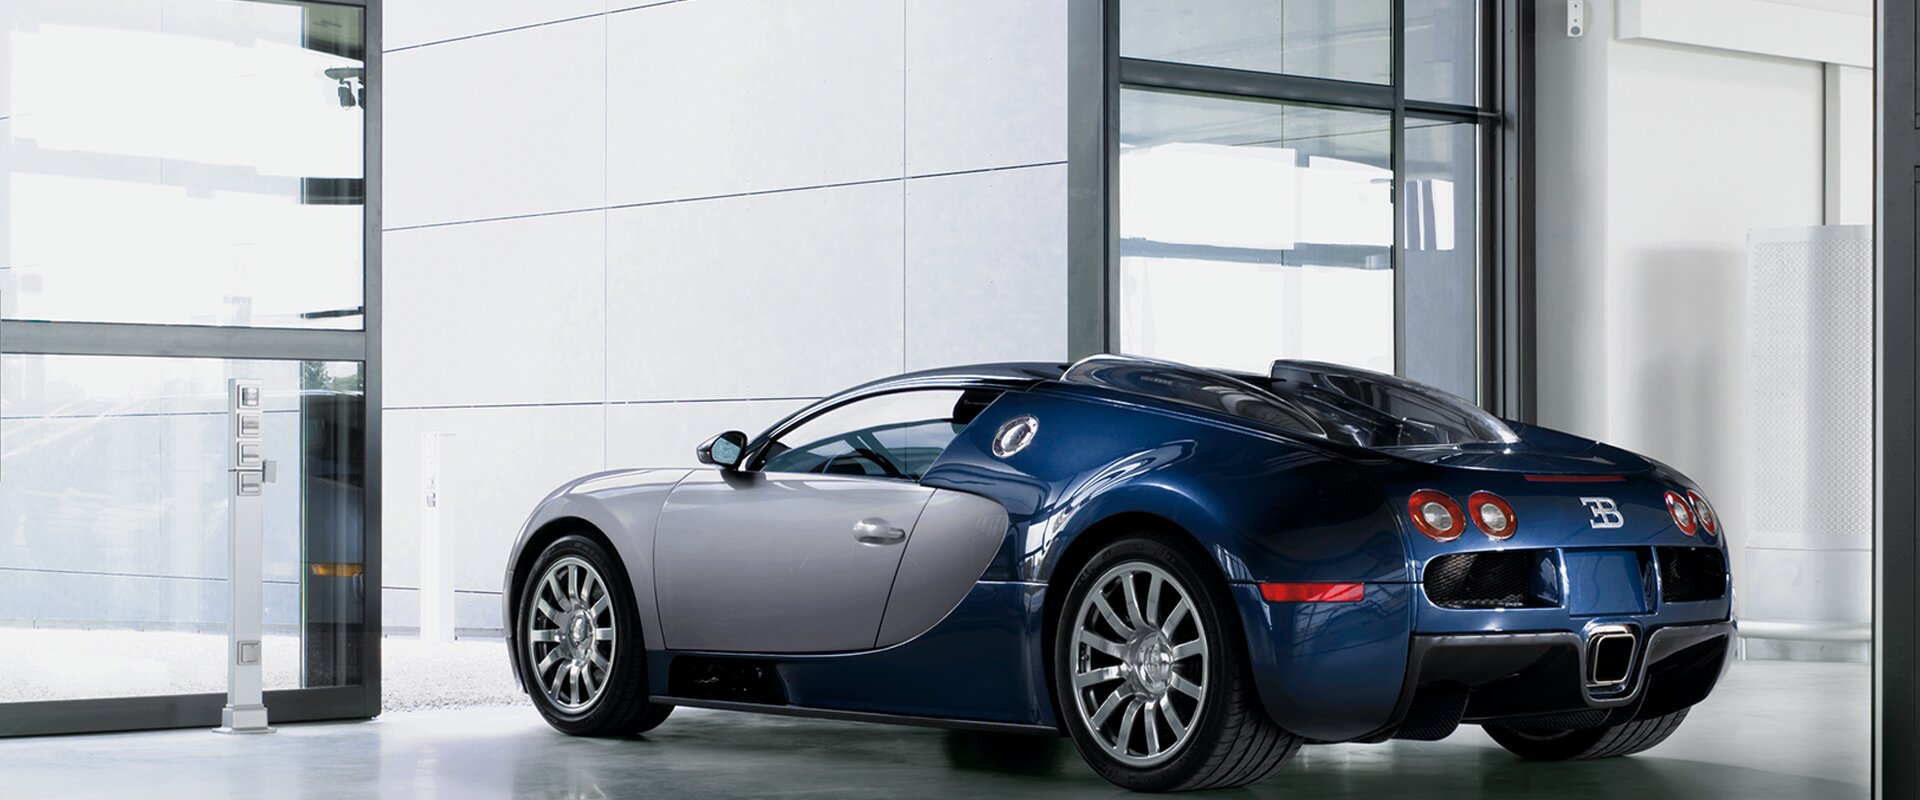 Detail Images Of Bugatti Cars Nomer 34